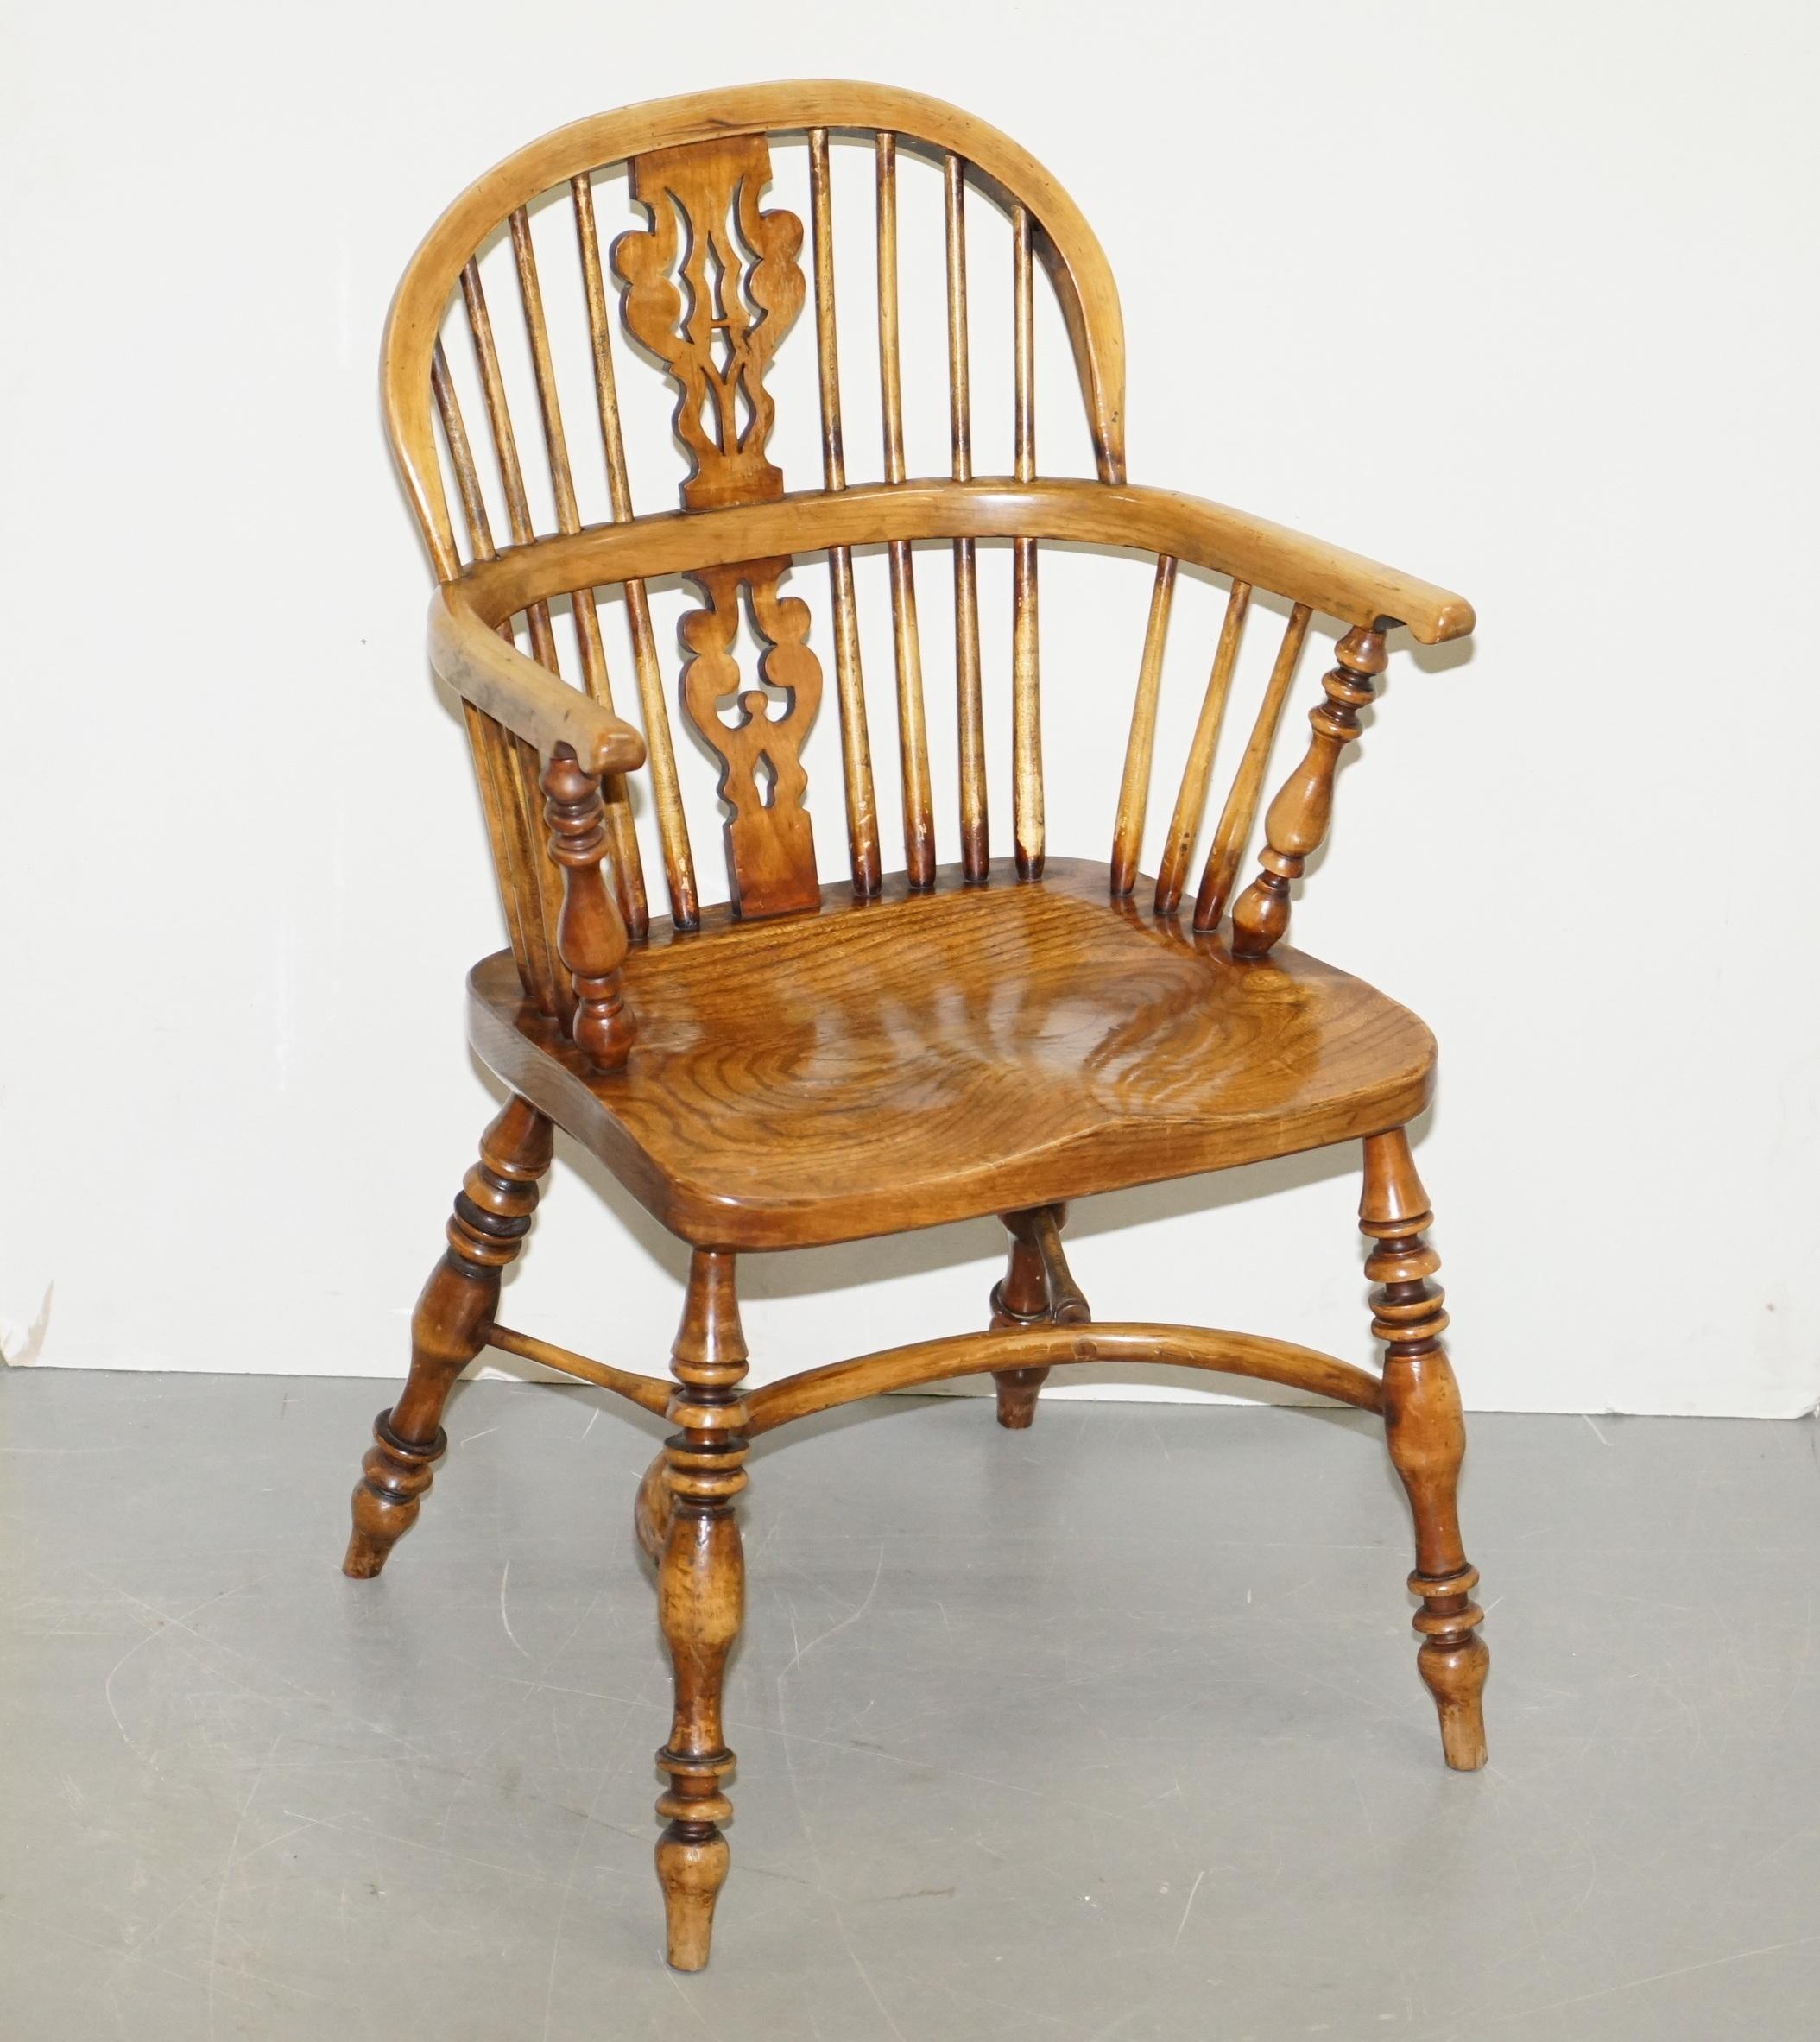 Wimbledon-Furniture

Wimbledon-Furniture is delighted to offer for sale this lovely solid Elm hand-sawn circa 1880 Windsor stick back armchair

Please note the delivery fee listed is just a guide, it covers within the M25 only, for an accurate